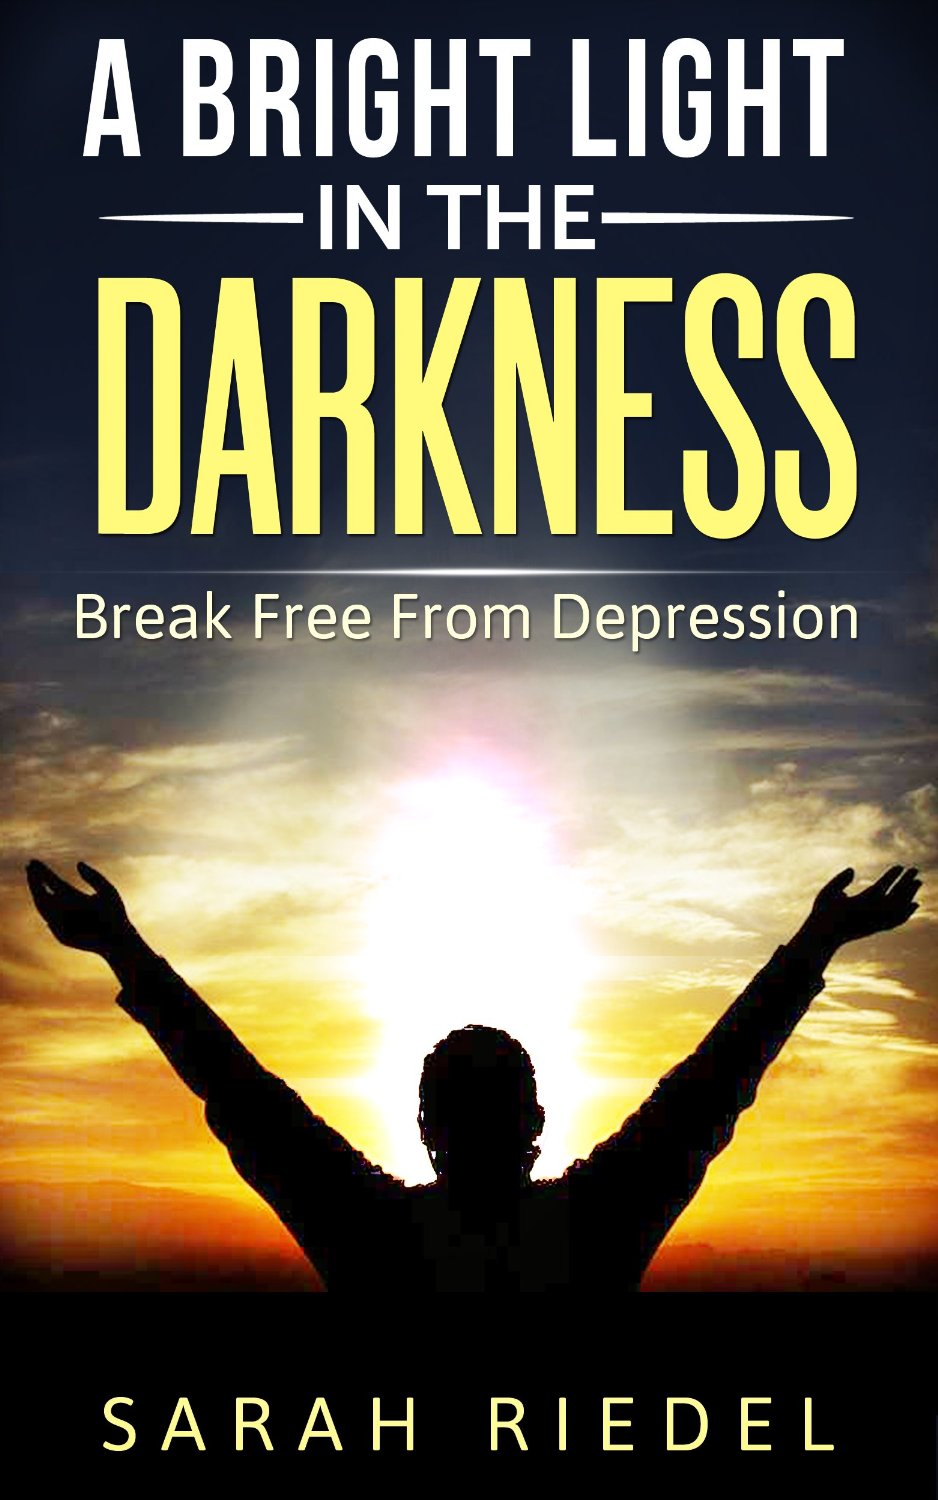 A Bright Light in the Darkness: Break Free From Depression